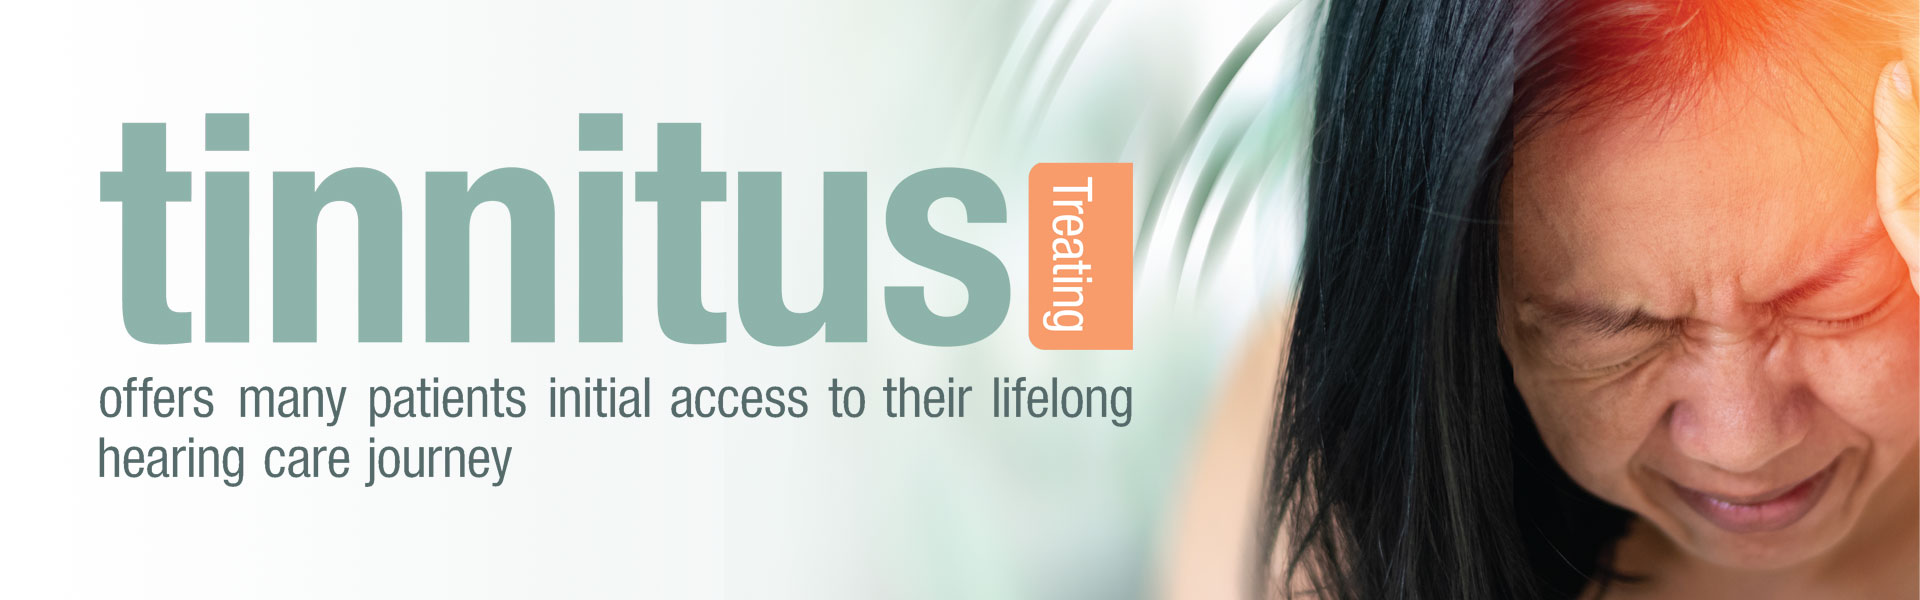 Treating Tinnitus Offers Many Patients Initial Access to their Lifelong Hearing Care Journey